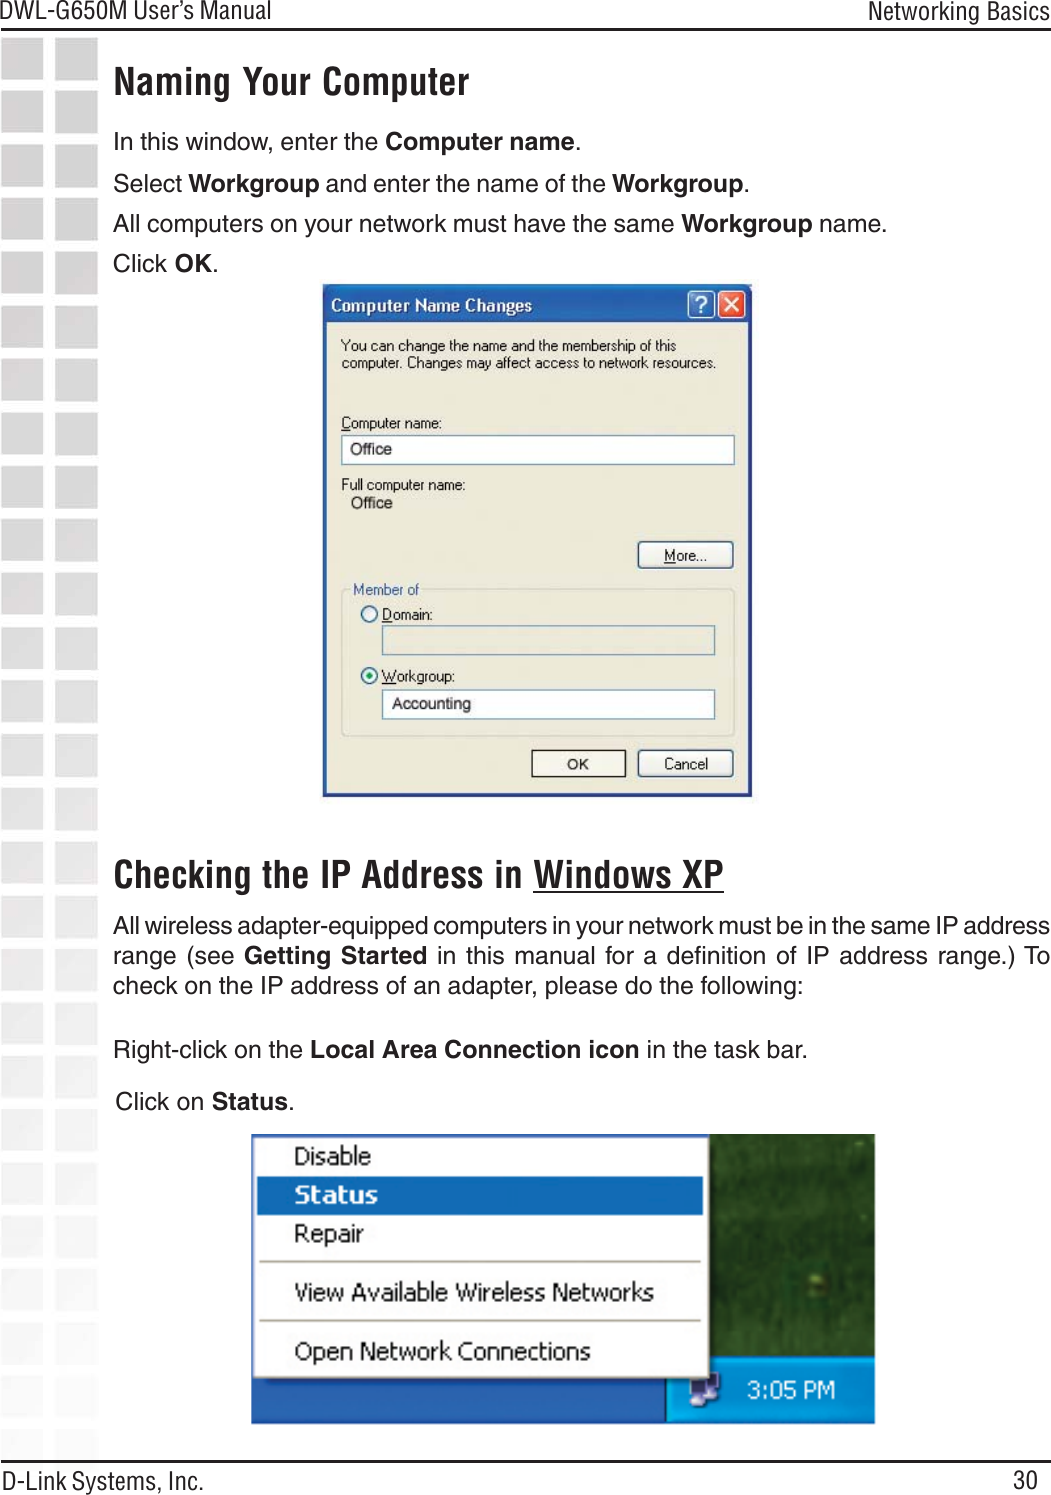 30DWL-G650M User’s ManualD-Link Systems, Inc.Networking BasicsNaming Your ComputerChecking the IP Address in Windows XPIn this window, enter the Computer name.Select Workgroup and enter the name of the Workgroup.All computers on your network must have the same Workgroup name.Click OK.All wireless adapter-equipped computers in your network must be in the same IP addressrange (see Getting Started in this manual for a definition of IP address range.) Tocheck on the IP address of an adapter, please do the following:Right-click on the Local Area Connection icon in the task bar.Click on Status.